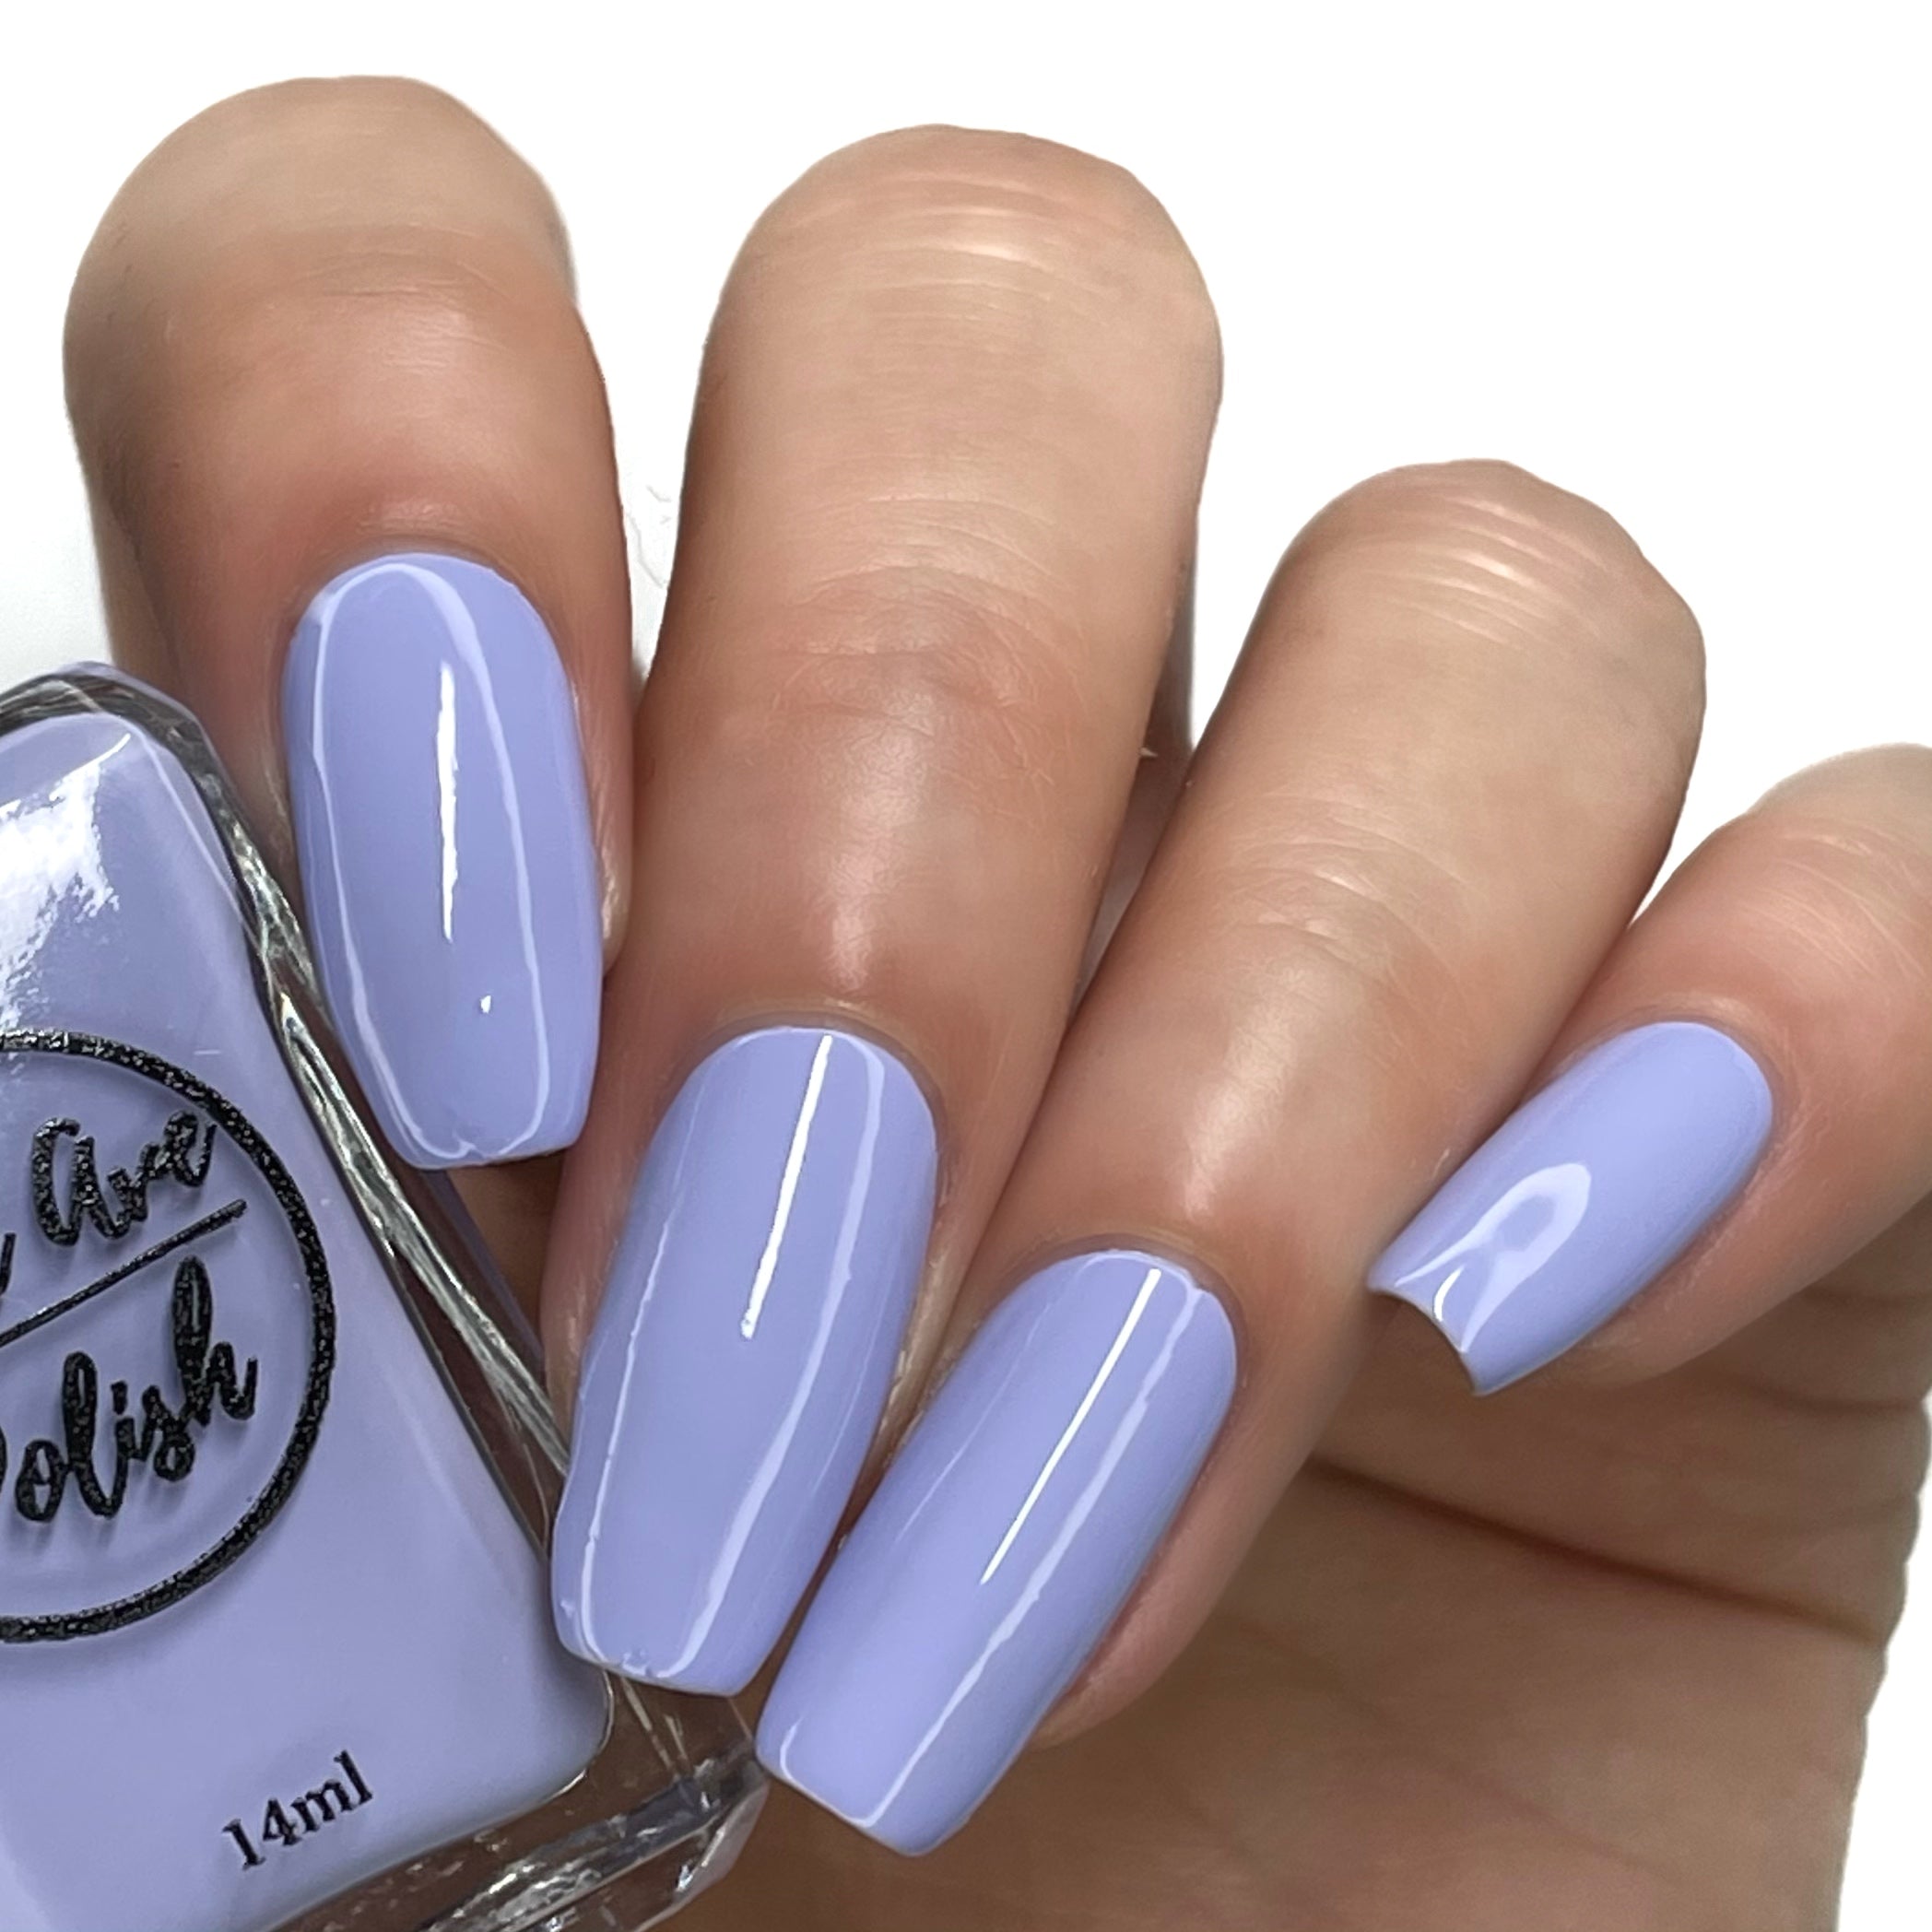 The Beauty Of The Lilac Color In The Real Life | Lilac nails, Lilac nails  design, Lavender nails